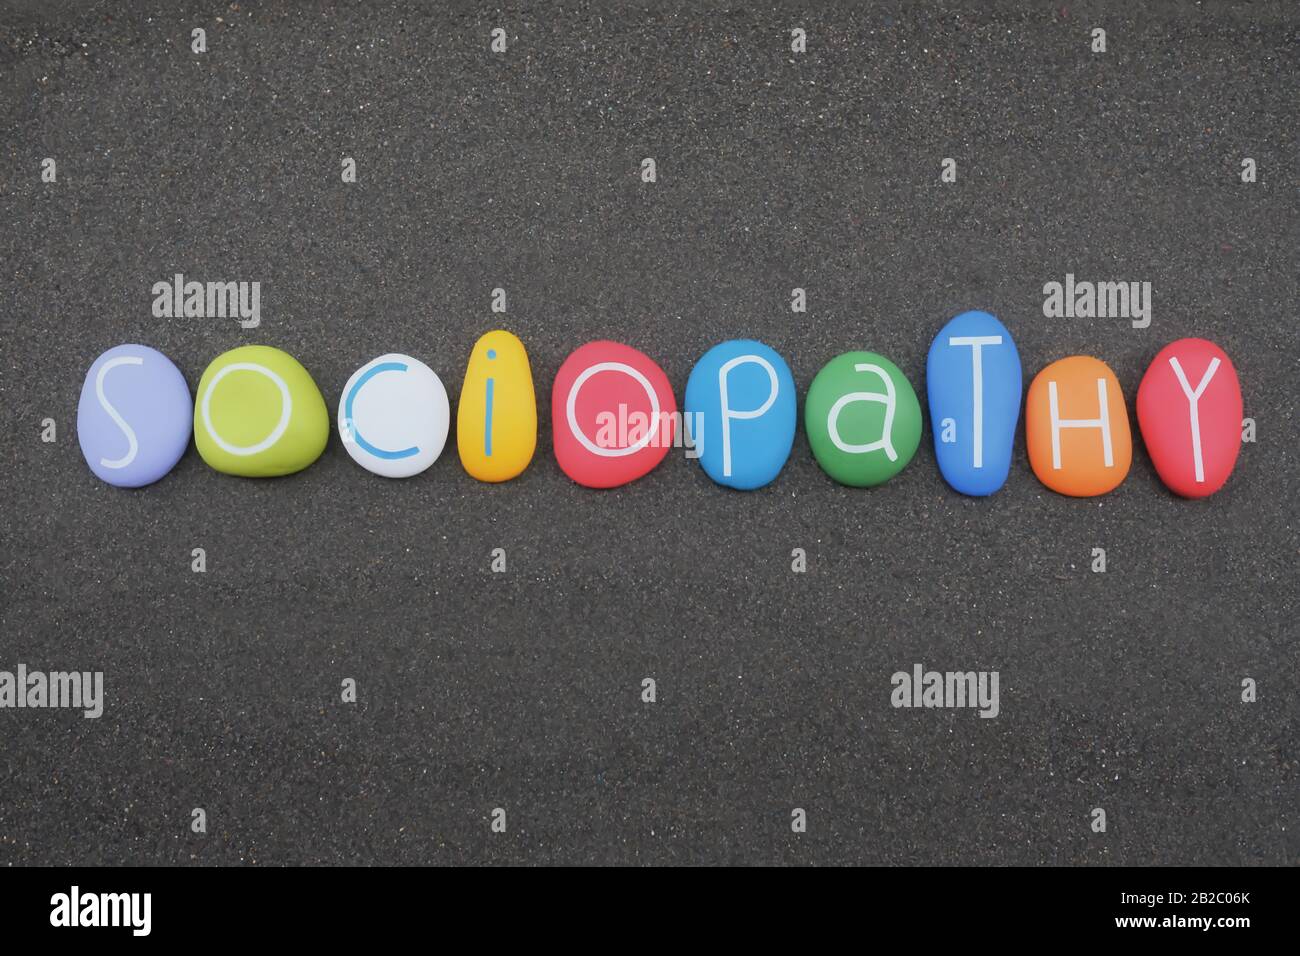 Sociopathy, Antisocial personality disorder, word composed with multi colored stone letters Stock Photo